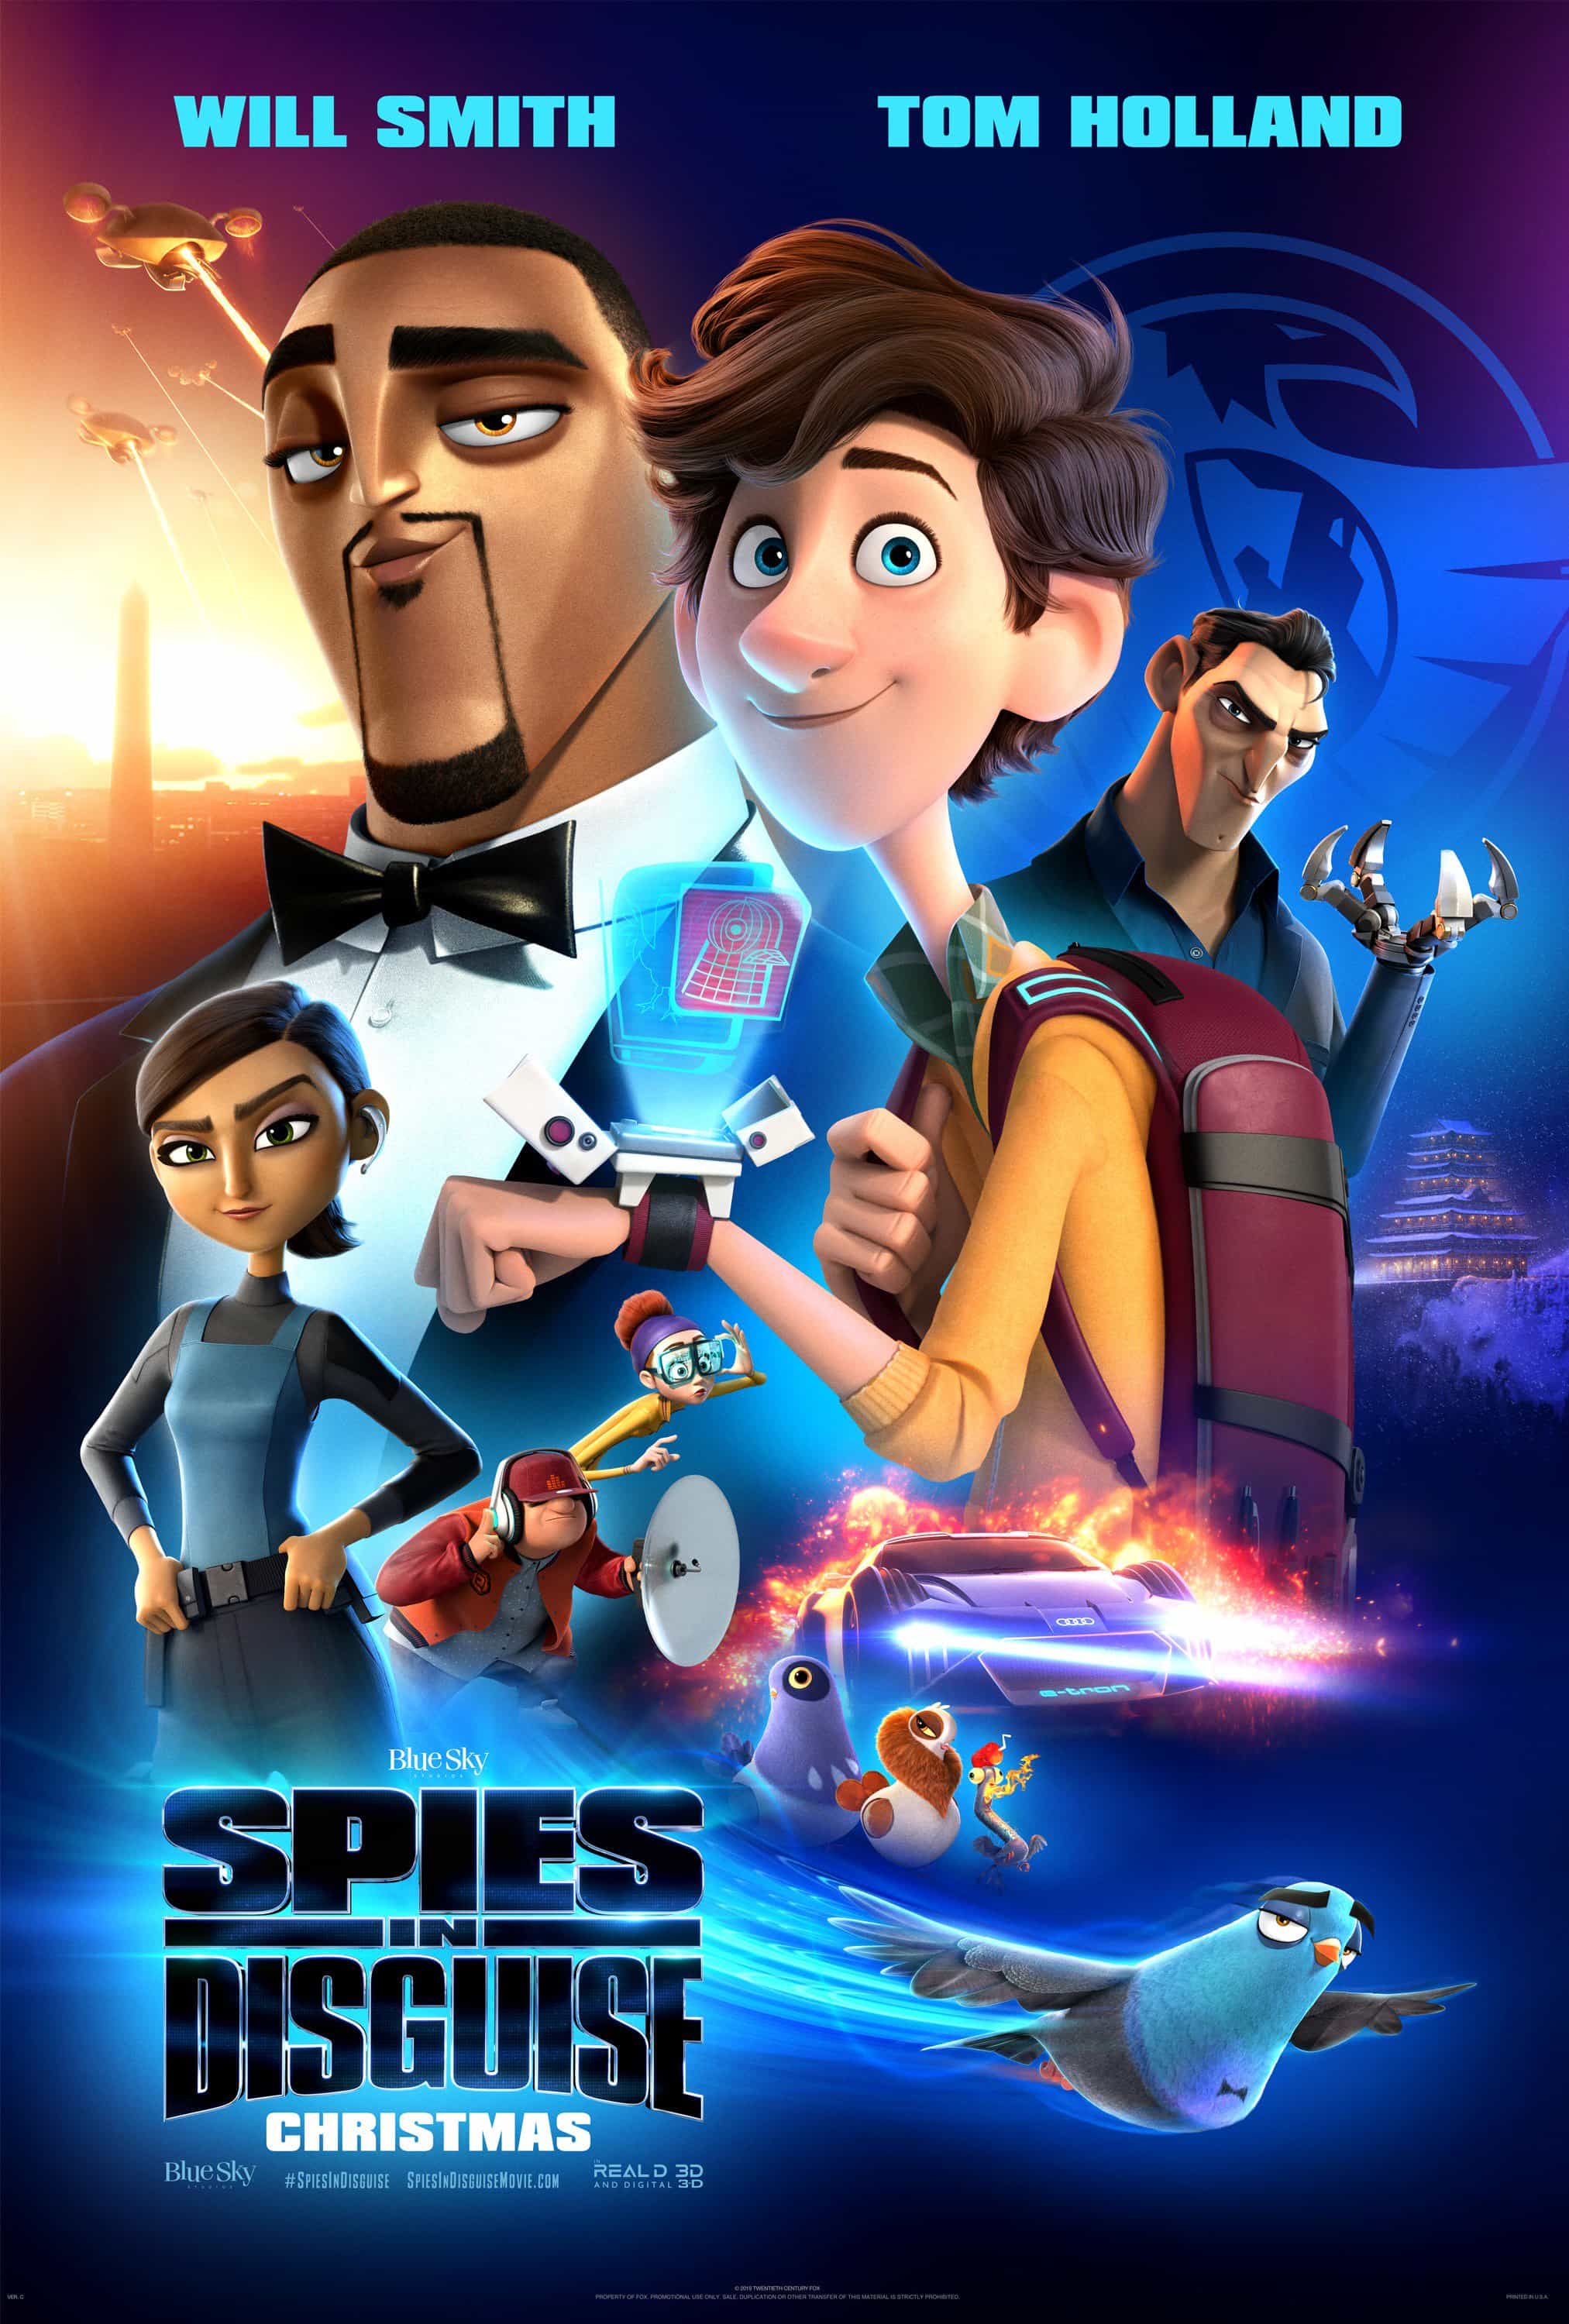 Fox release a new trailer for the Will Smith and Tom Holland starring animated movie Spies In Disguise